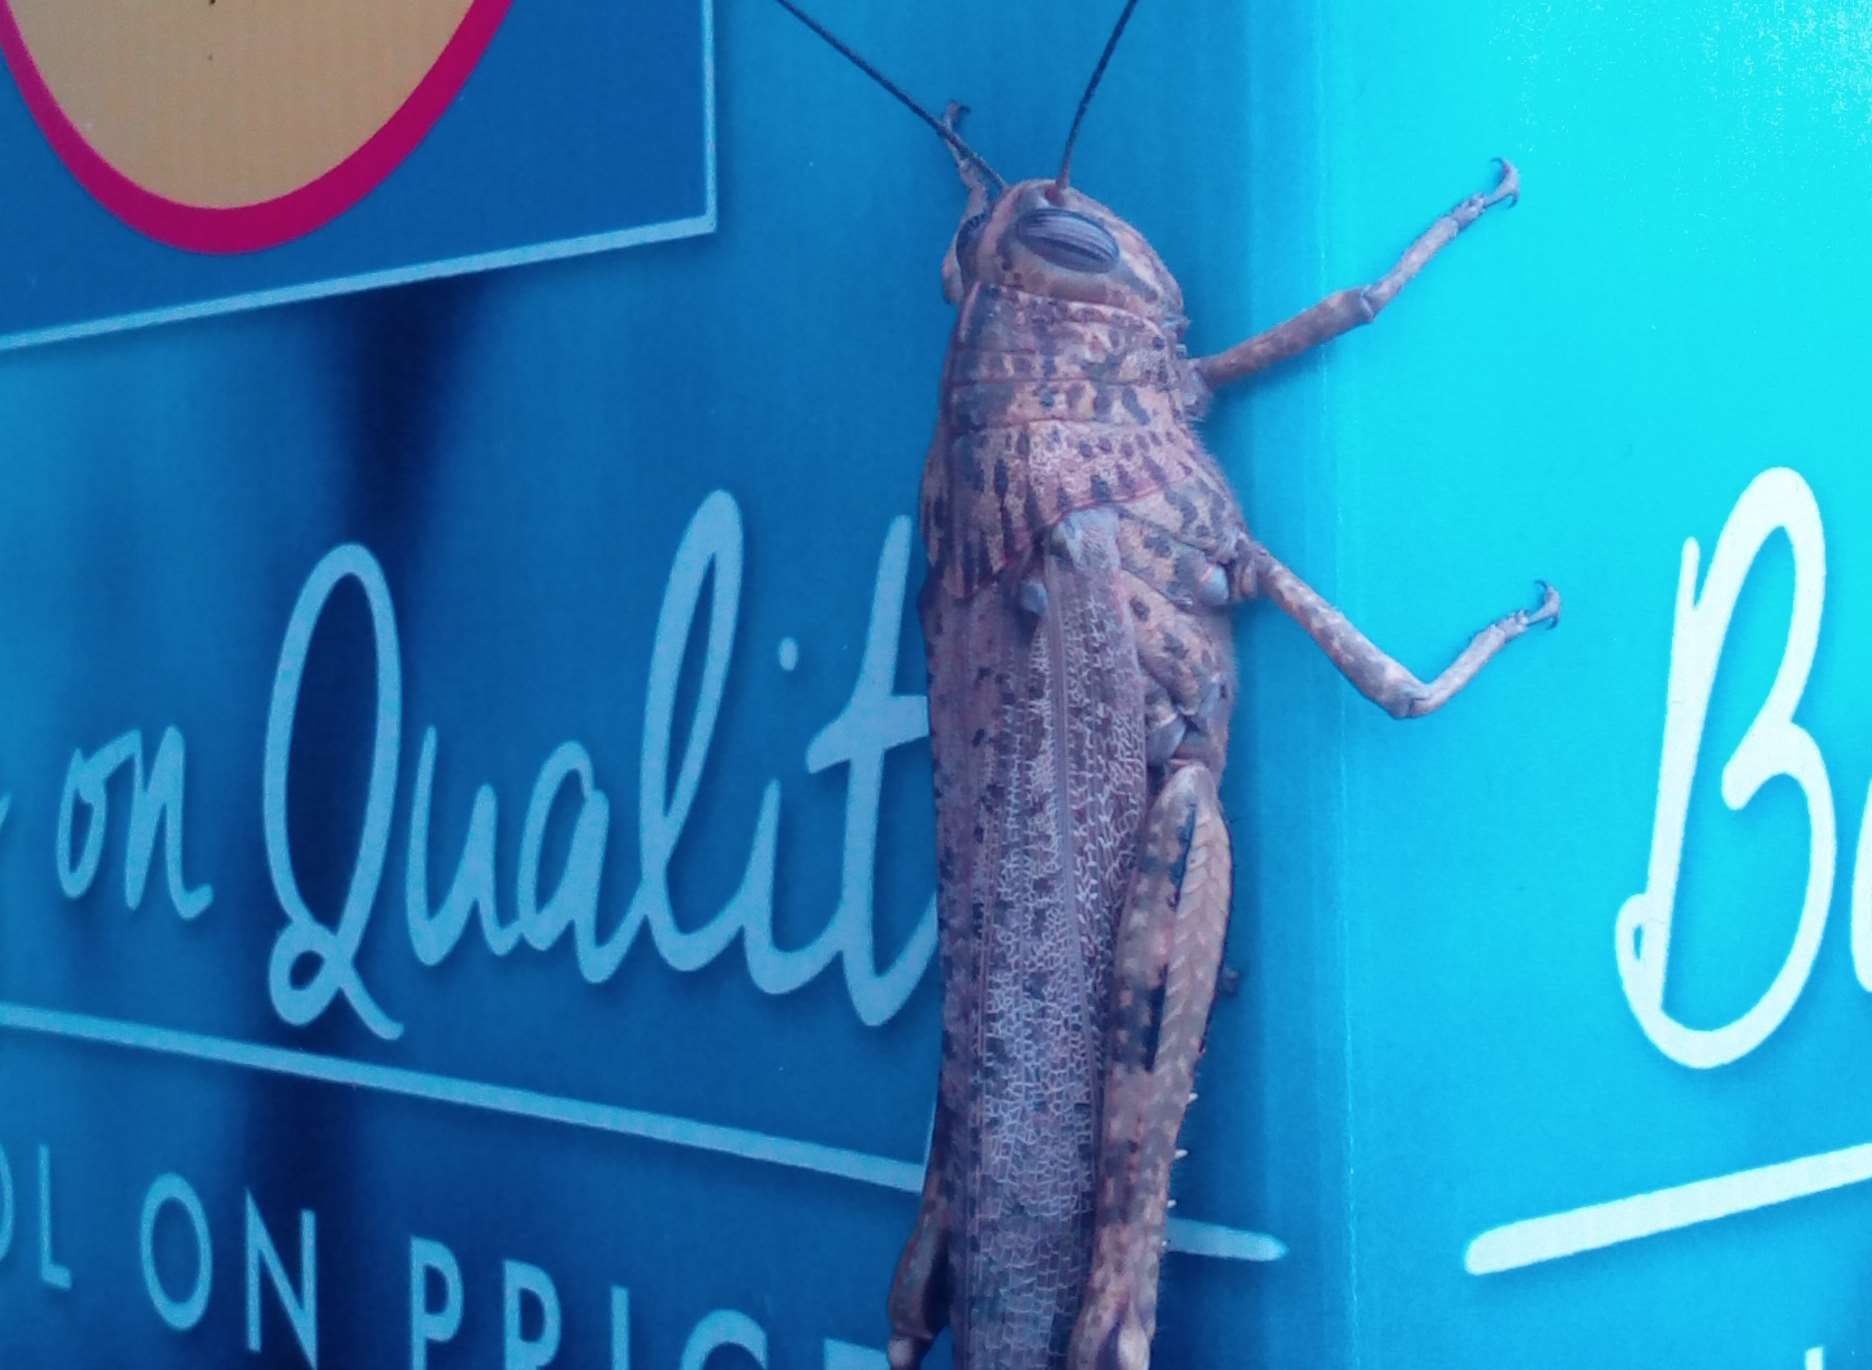 The Locust which visited the Lidl store in Canterbury